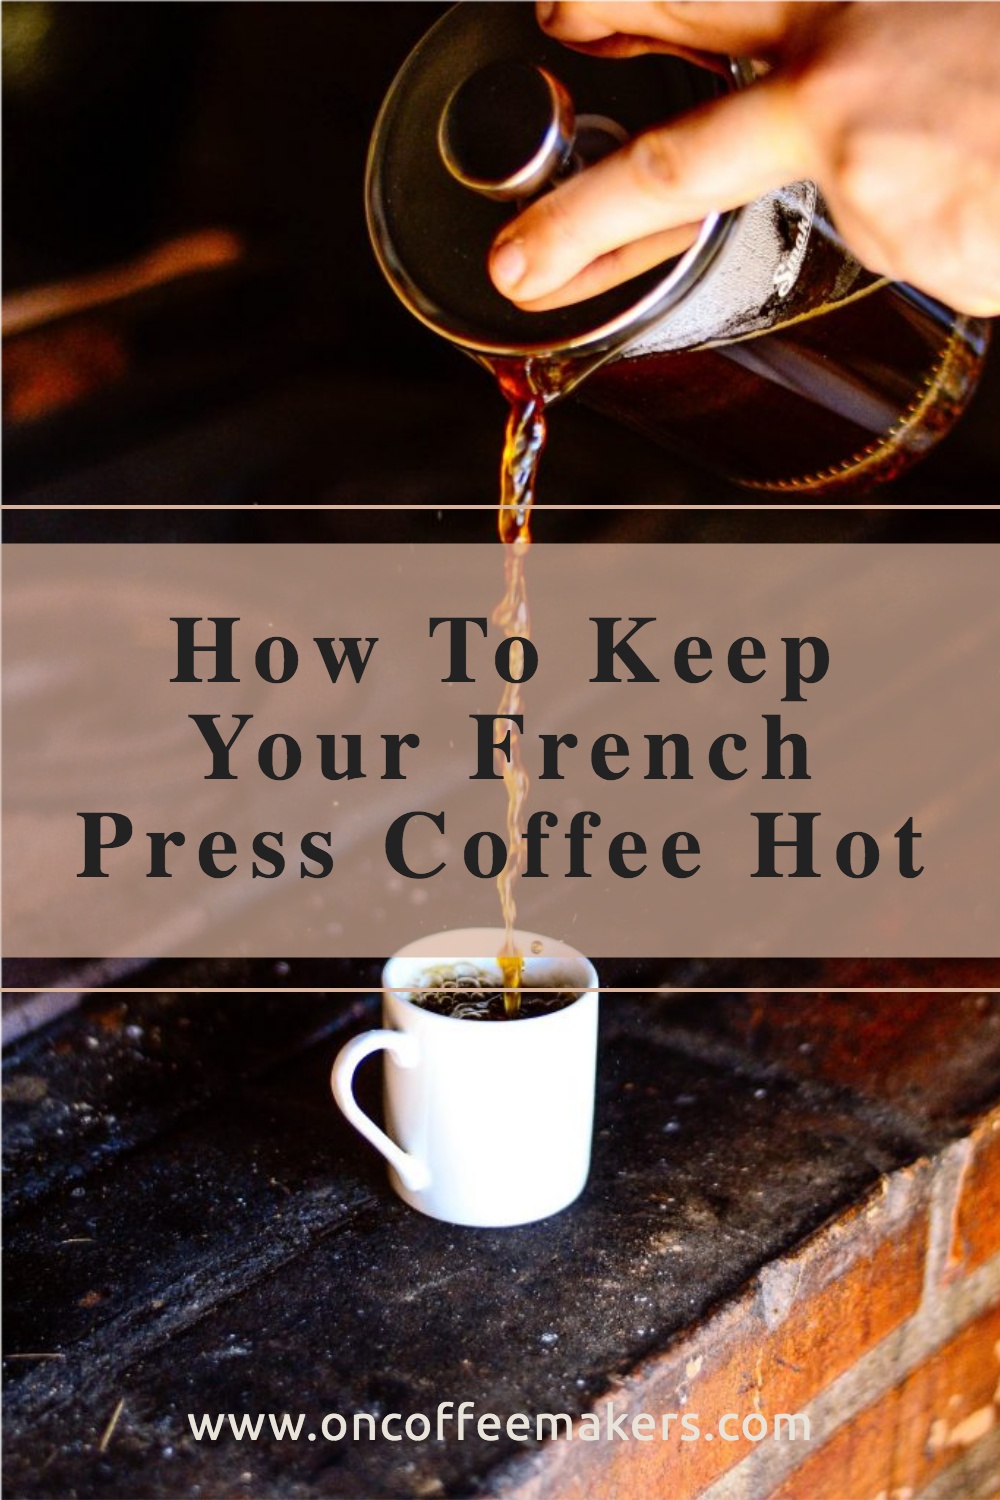 How To Keep Your French Press Coffee Hot